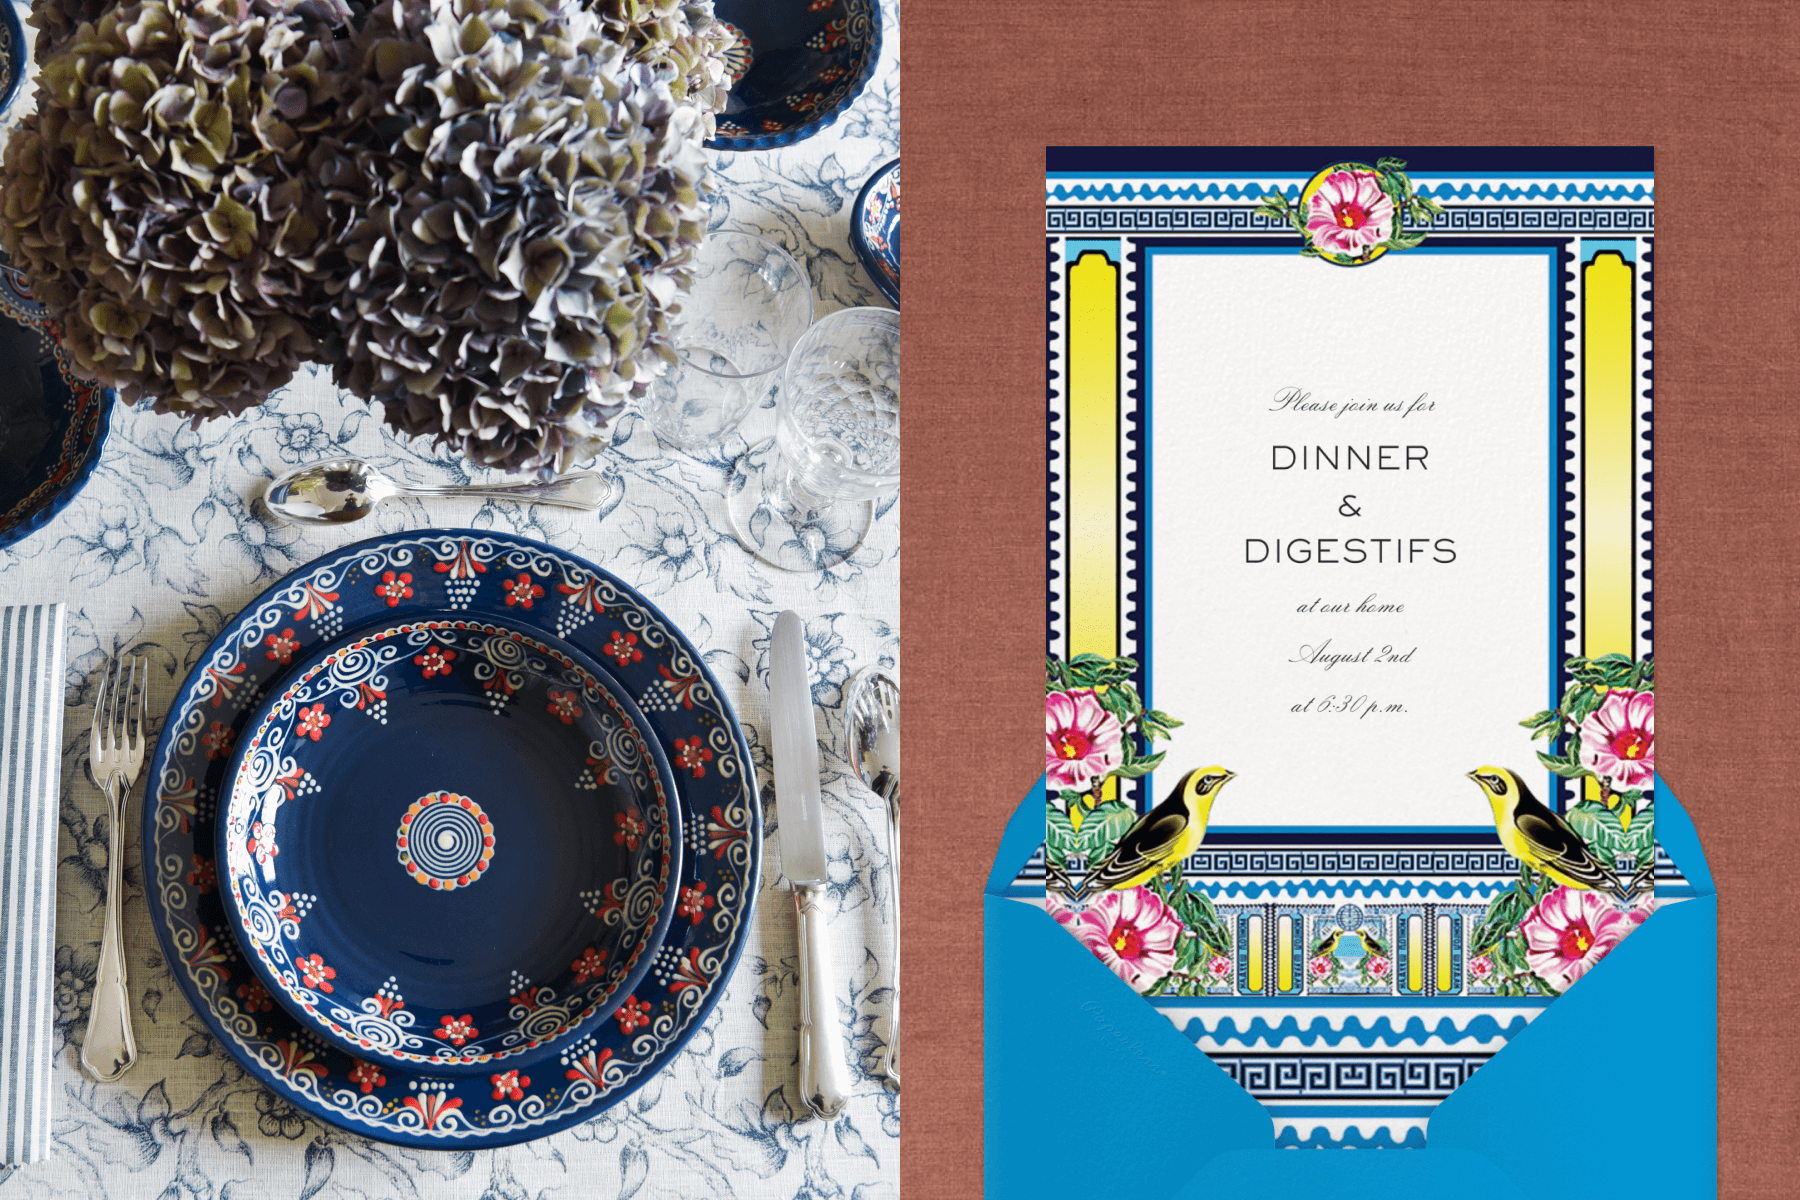 Left: Dinner table set with a white and blue floral tablecloth, navy ceramic plates, and a blue flower arrangement. Right: Dinner party invitation featuring a blue and yellow border with pink flowers, coming out of a blue envelope. 